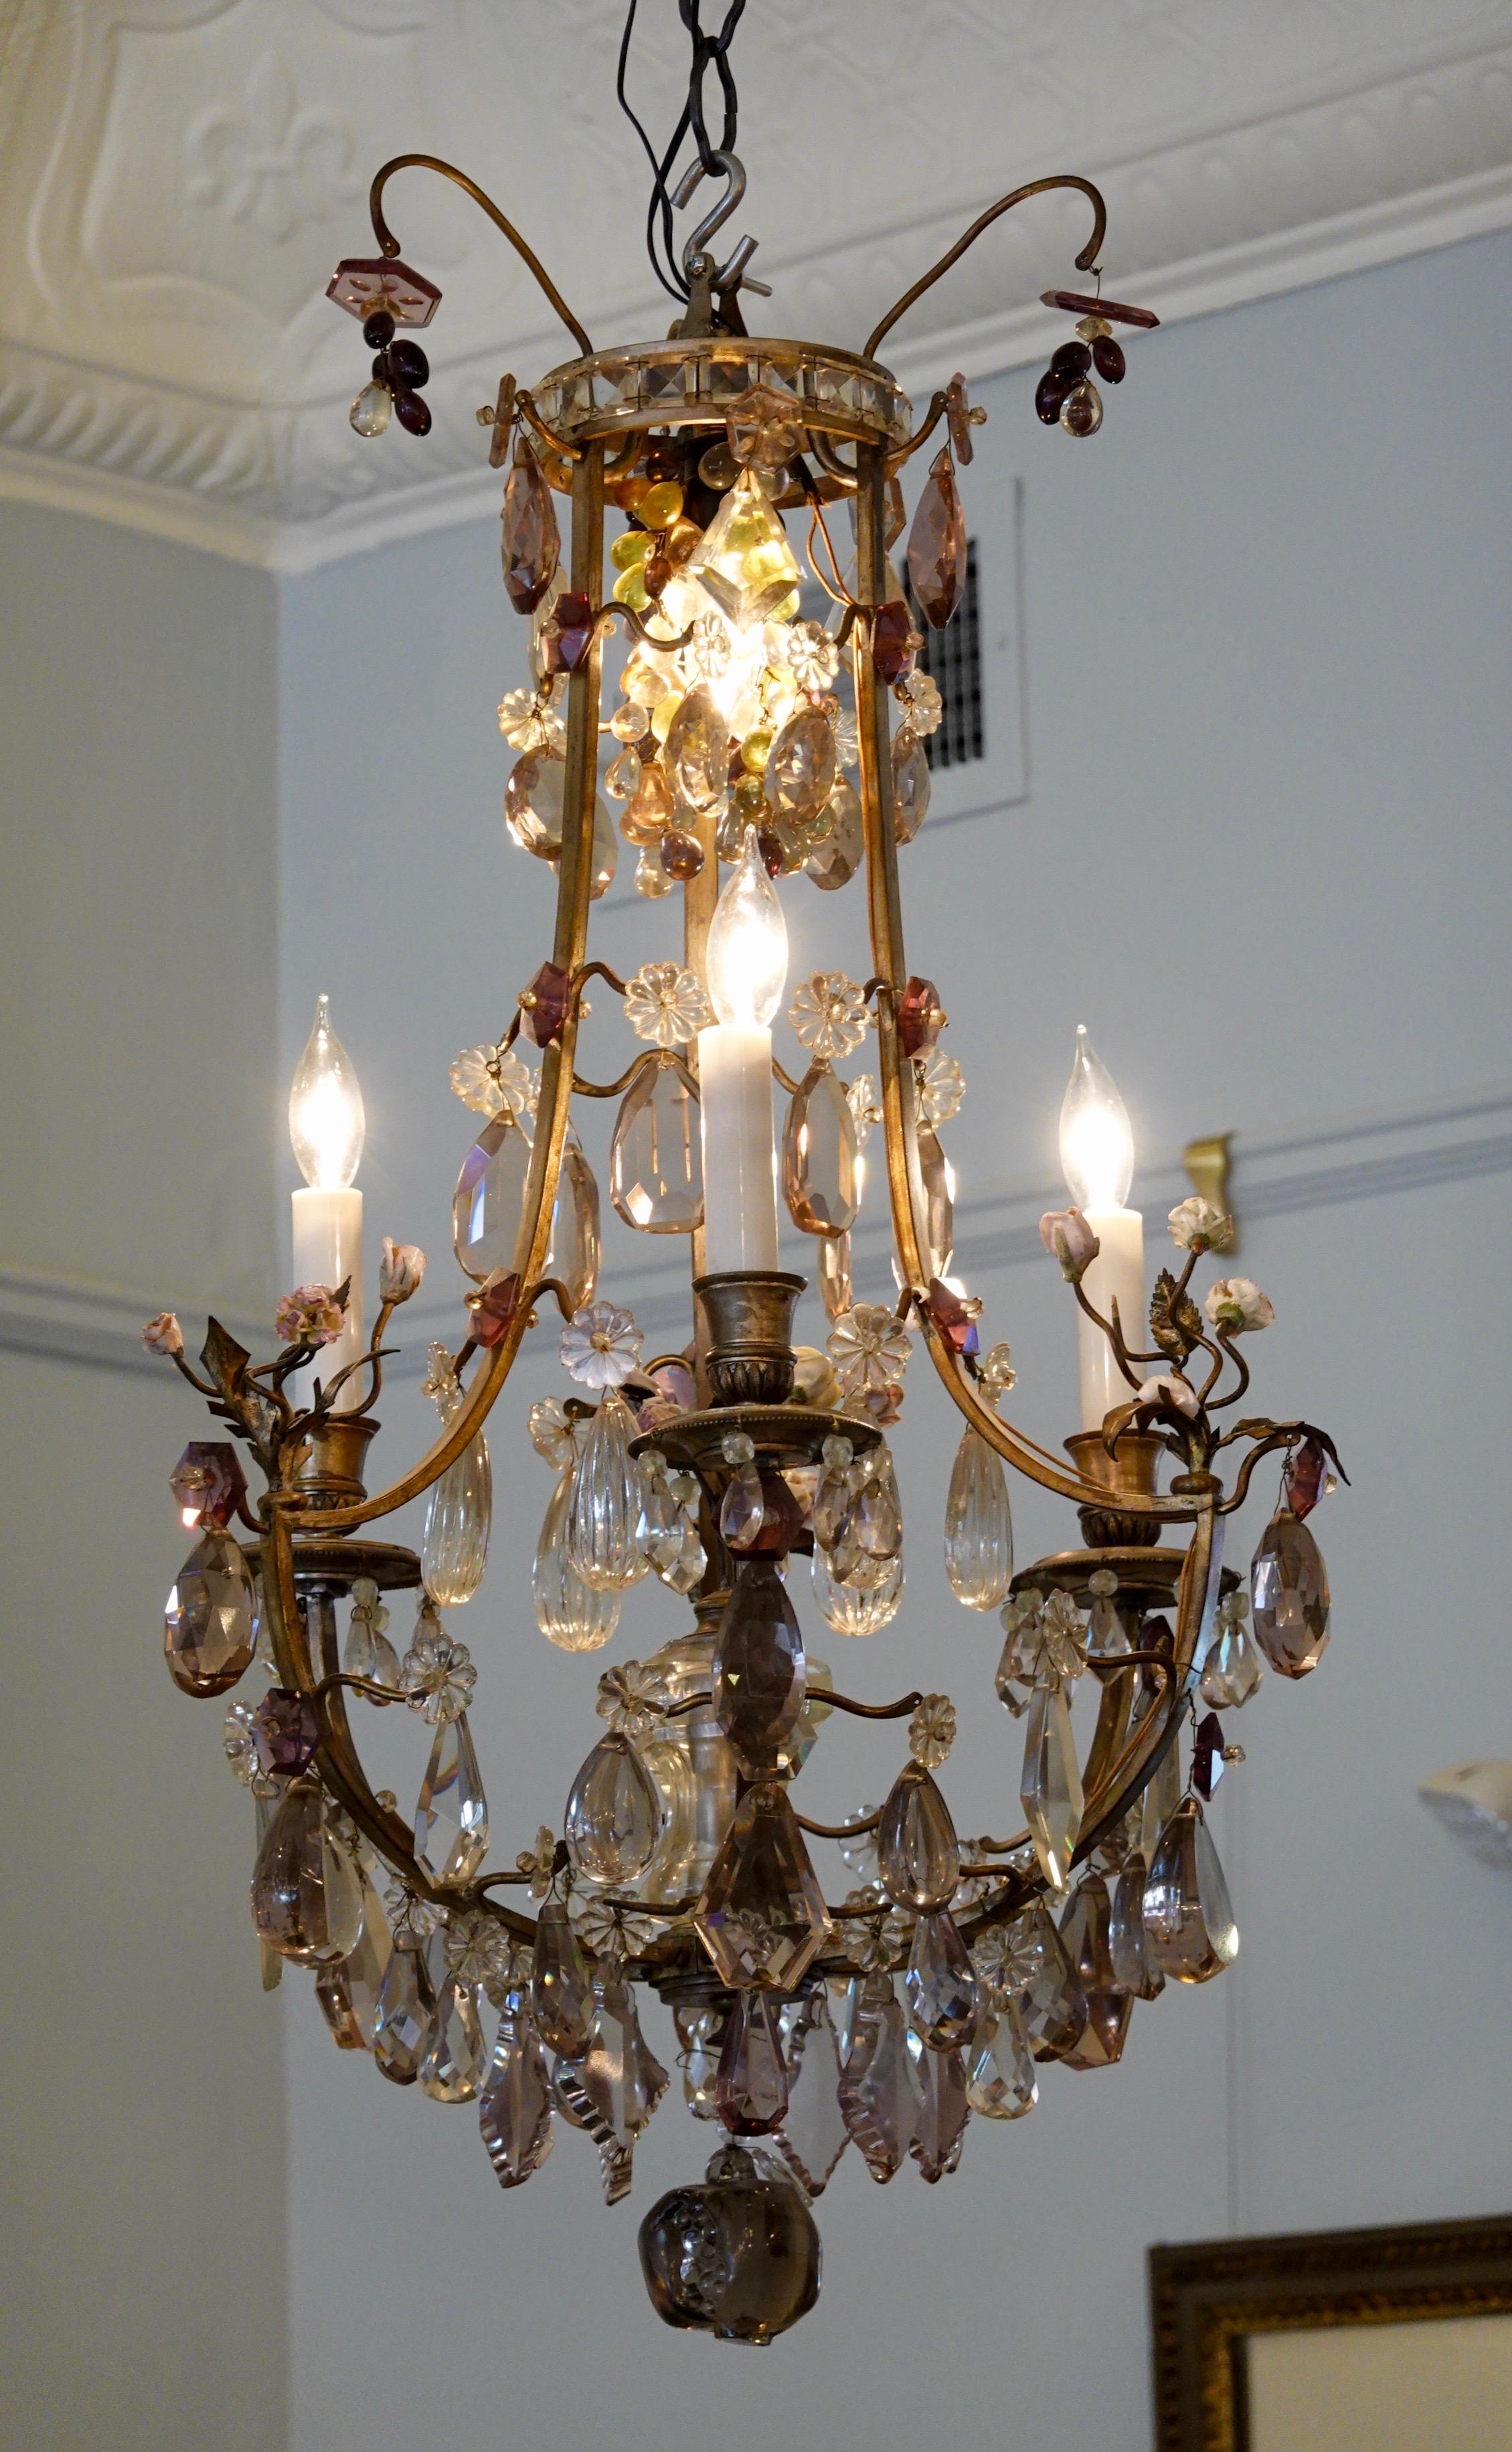 French cage-form bronze and crystal chandelier with porcelain flowers in the Louis XVI style, electrified with four lights. This chandelier features three bunches of porcelain flowers on the main arms, with a central spray of porcelain flowers in